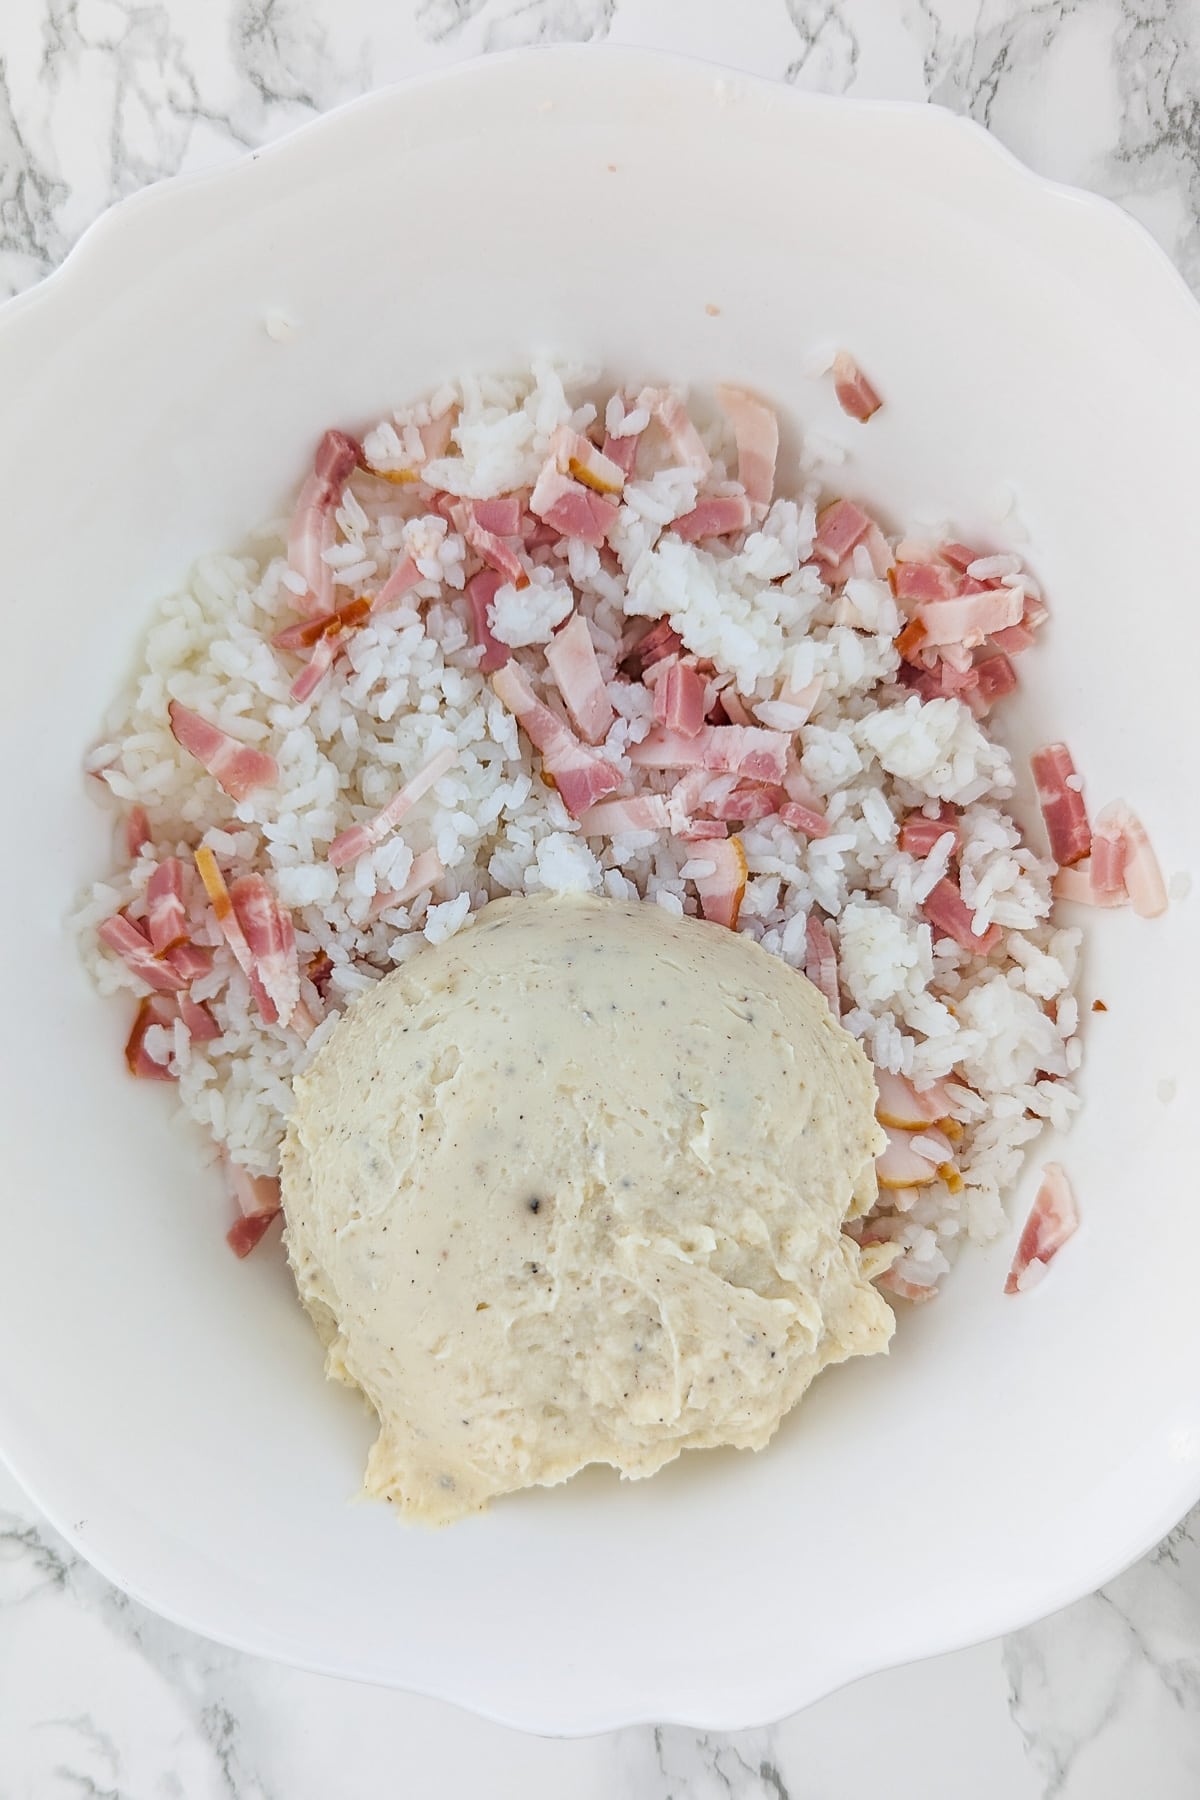 Cream, rice and ham in a white deep bowl on a white marble table.